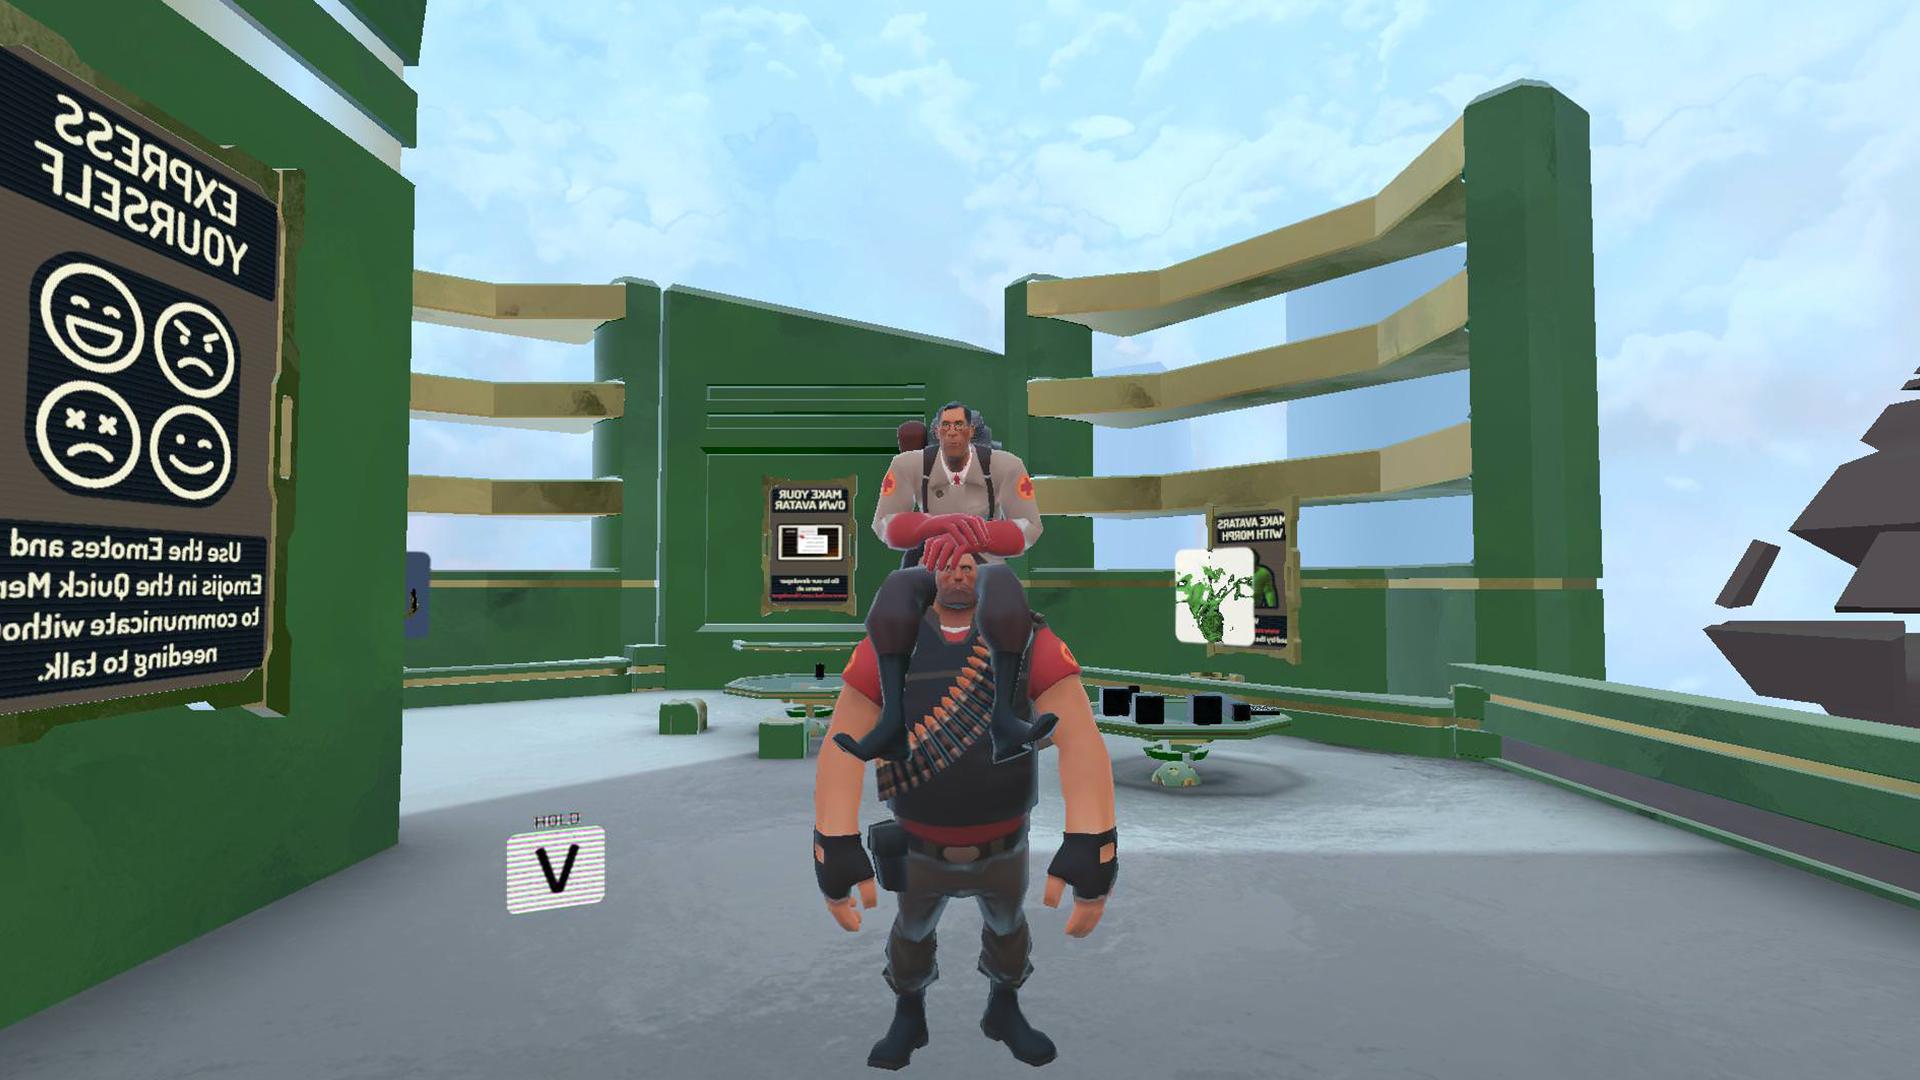 Vrchat Skins Team Fortress 2 Avatars For Android Apk Download - vrchat skins roblox avatars 10 apk androidappsapkco